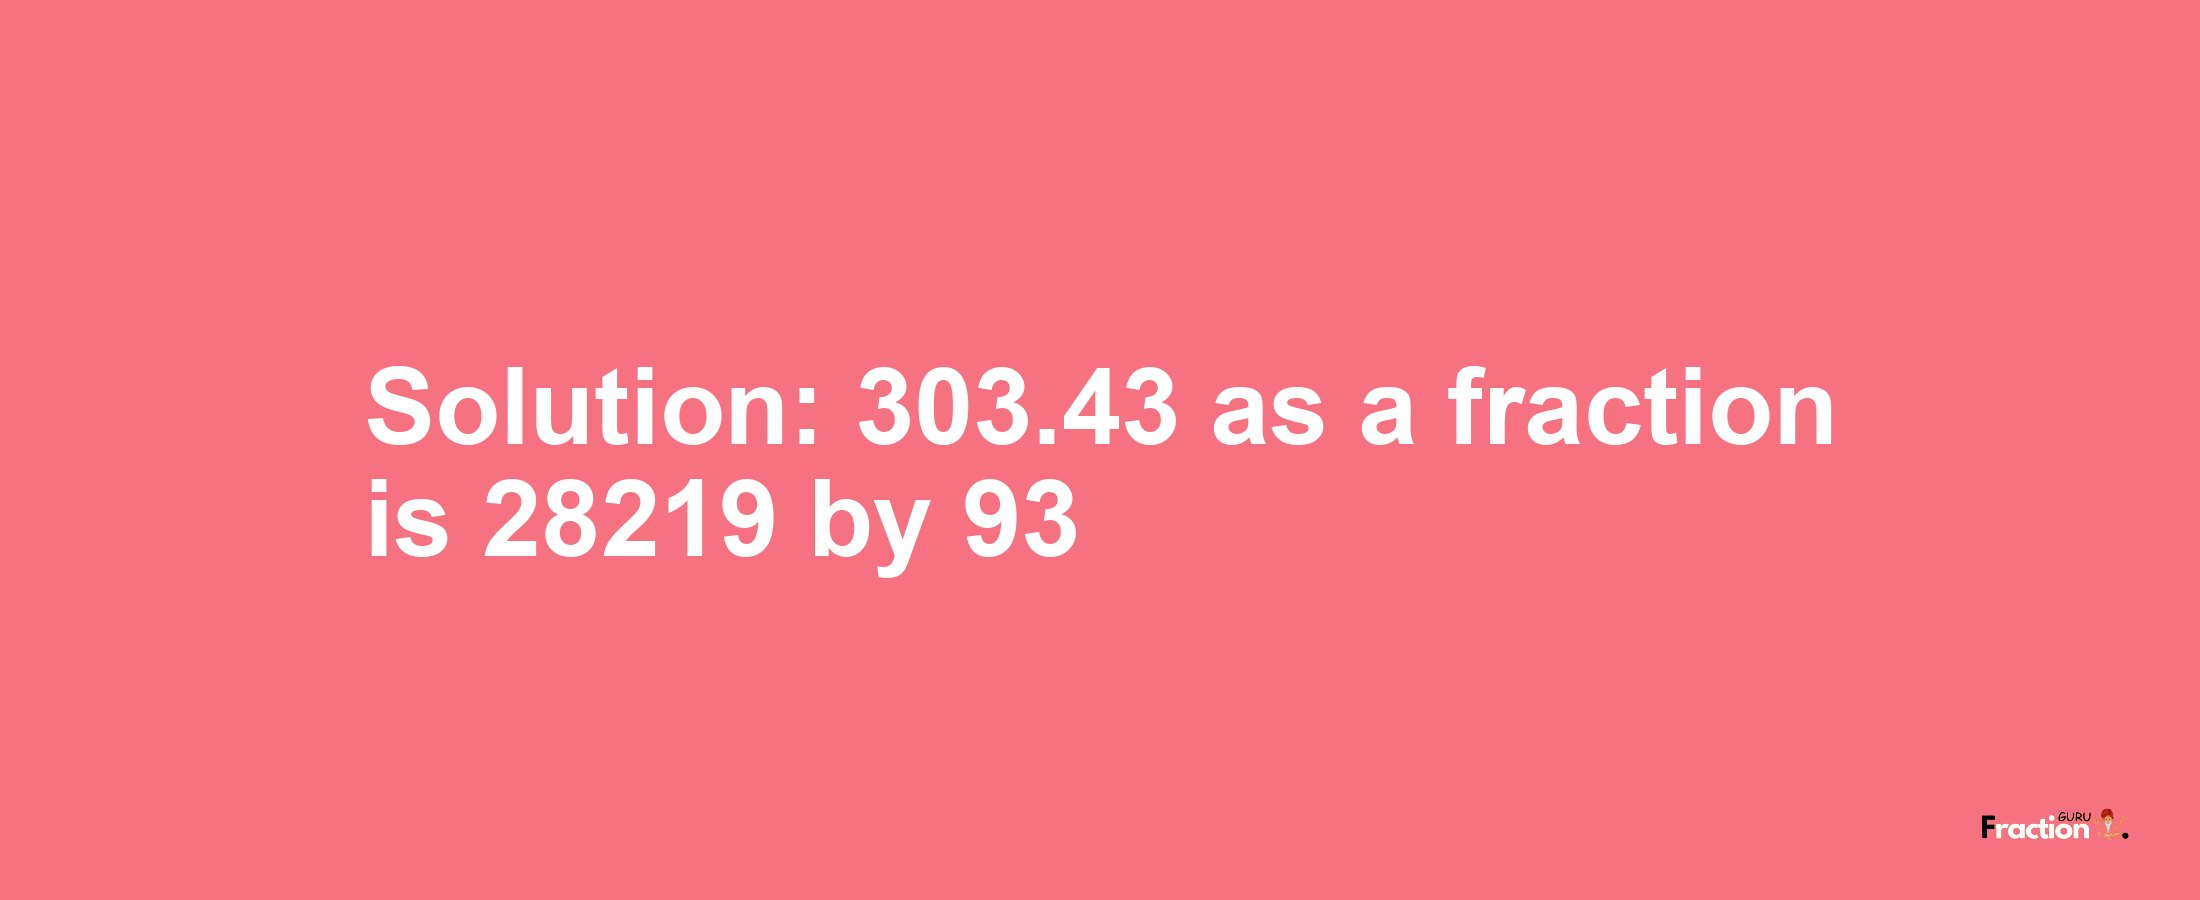 Solution:303.43 as a fraction is 28219/93